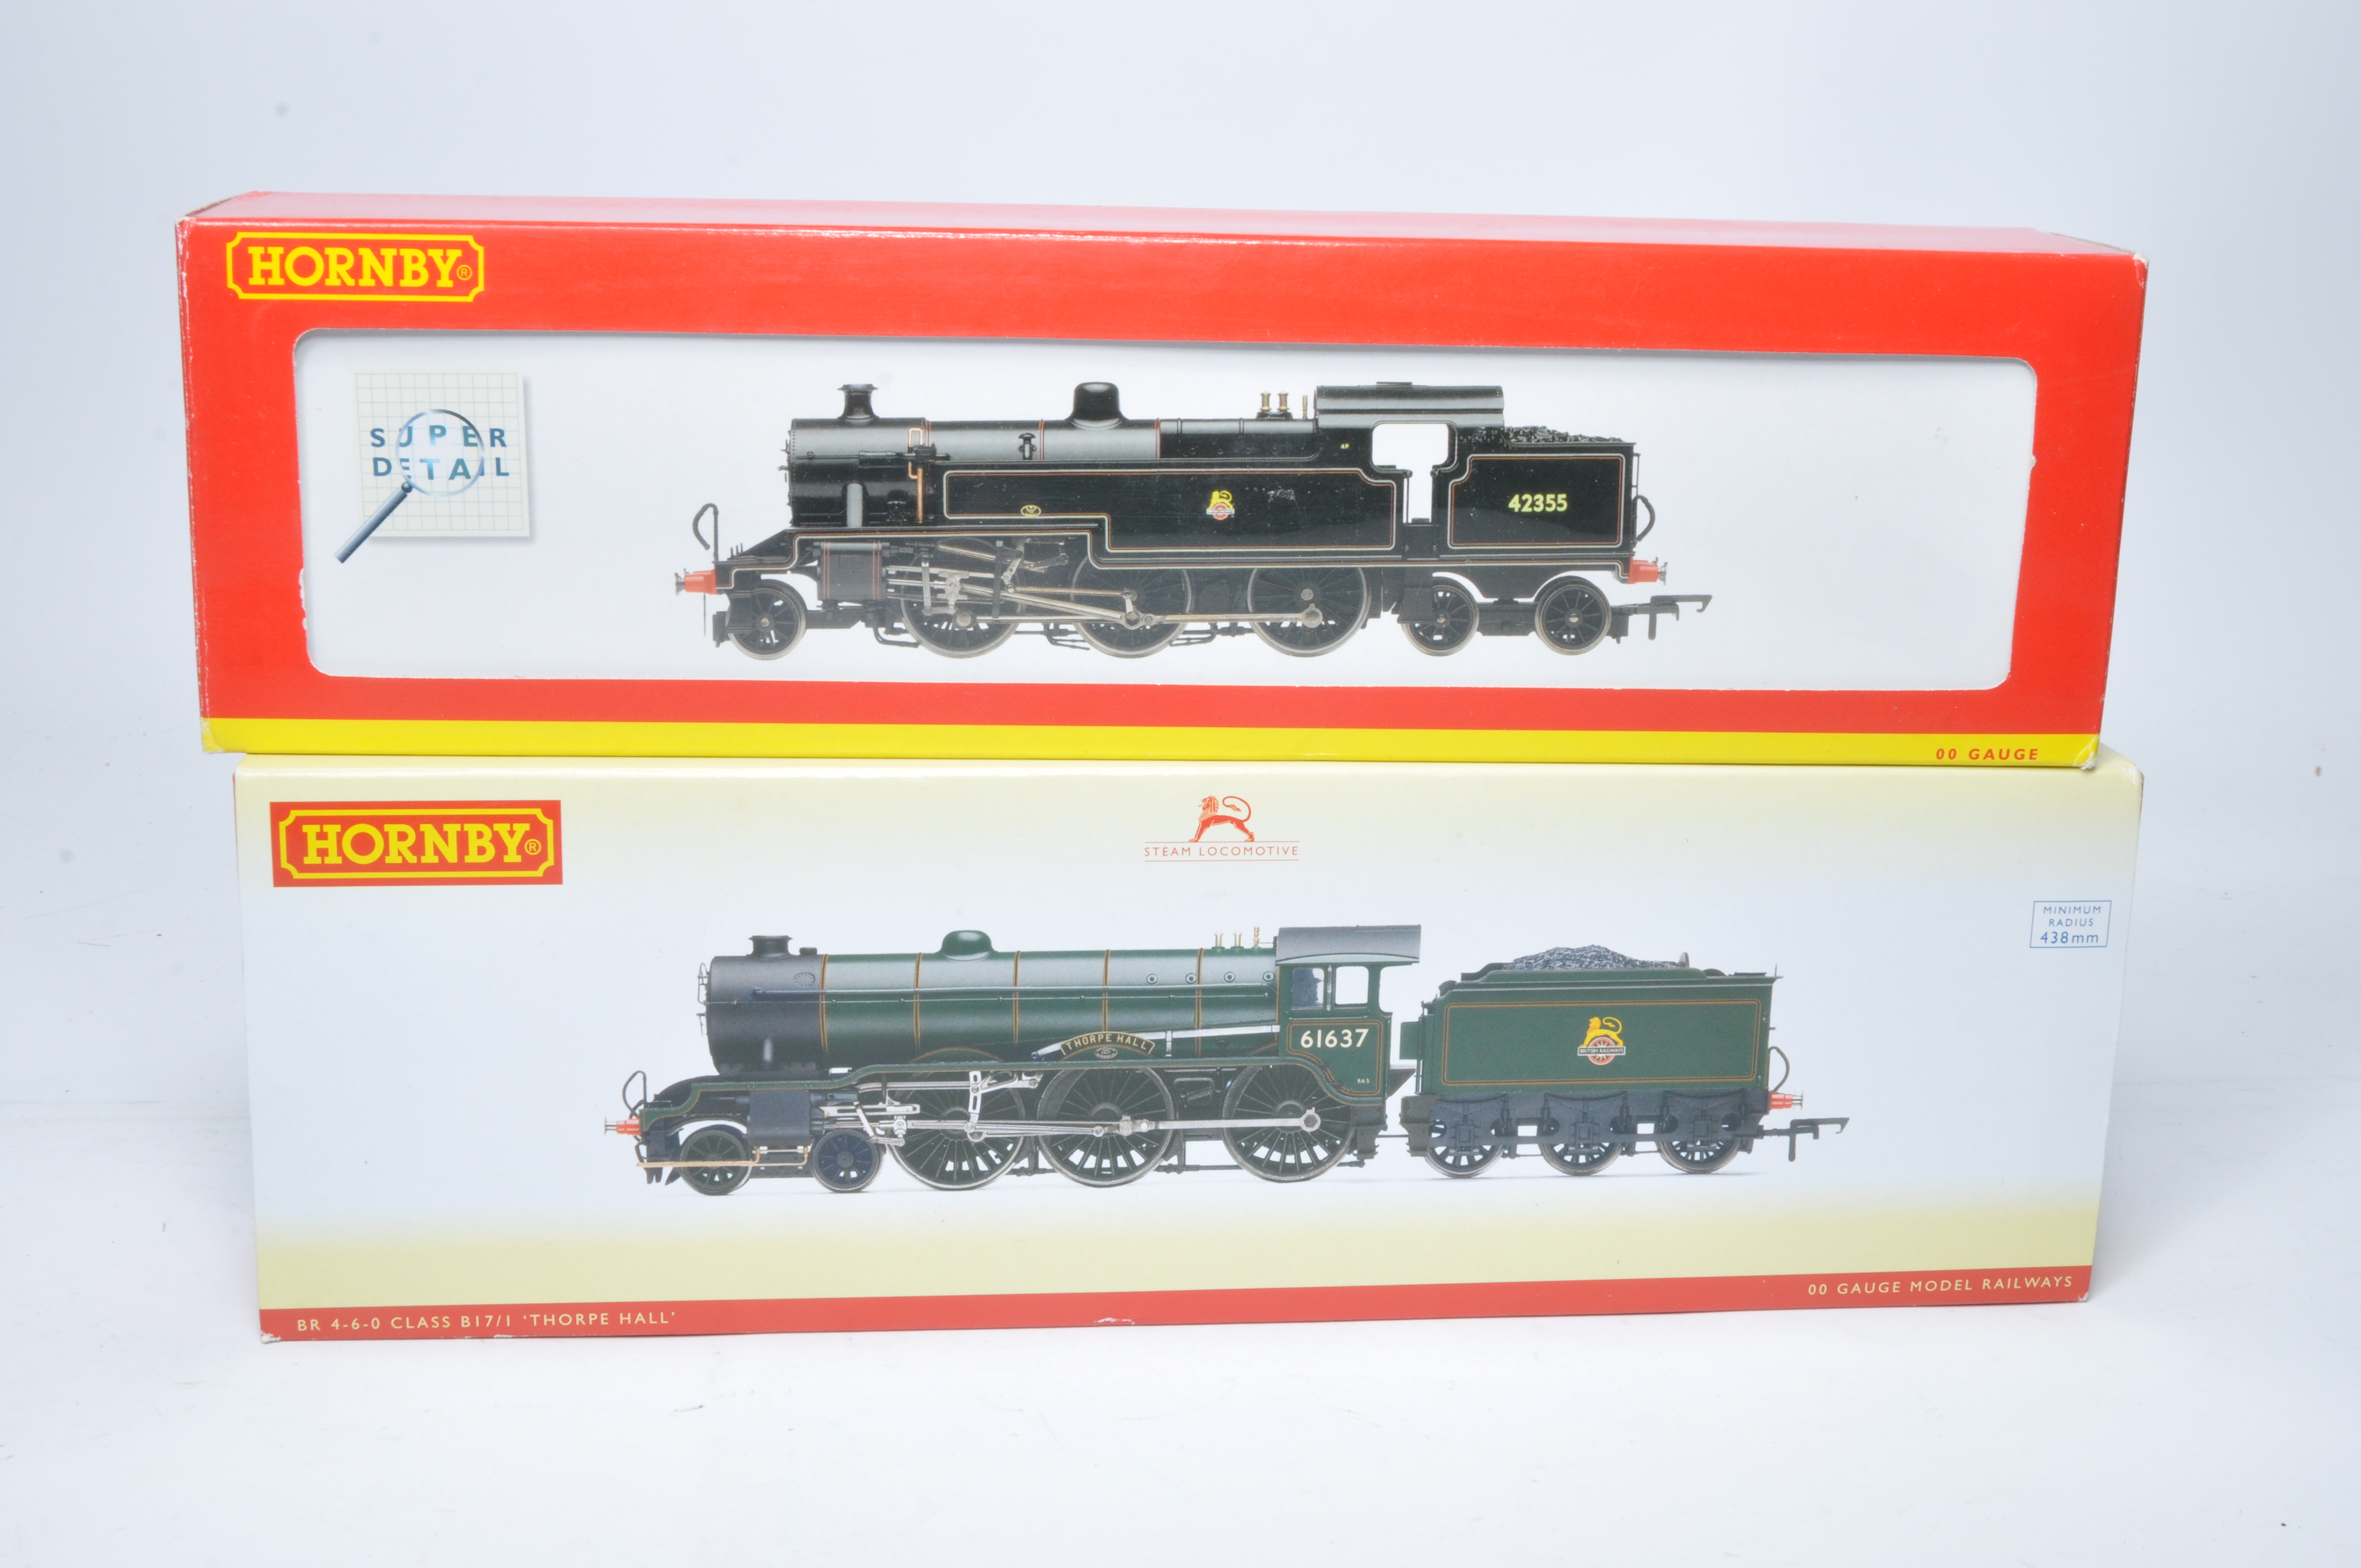 Hornby Model Railway comprising duo of locomotive issues including No. R2223 Fowler Class 4P Plus